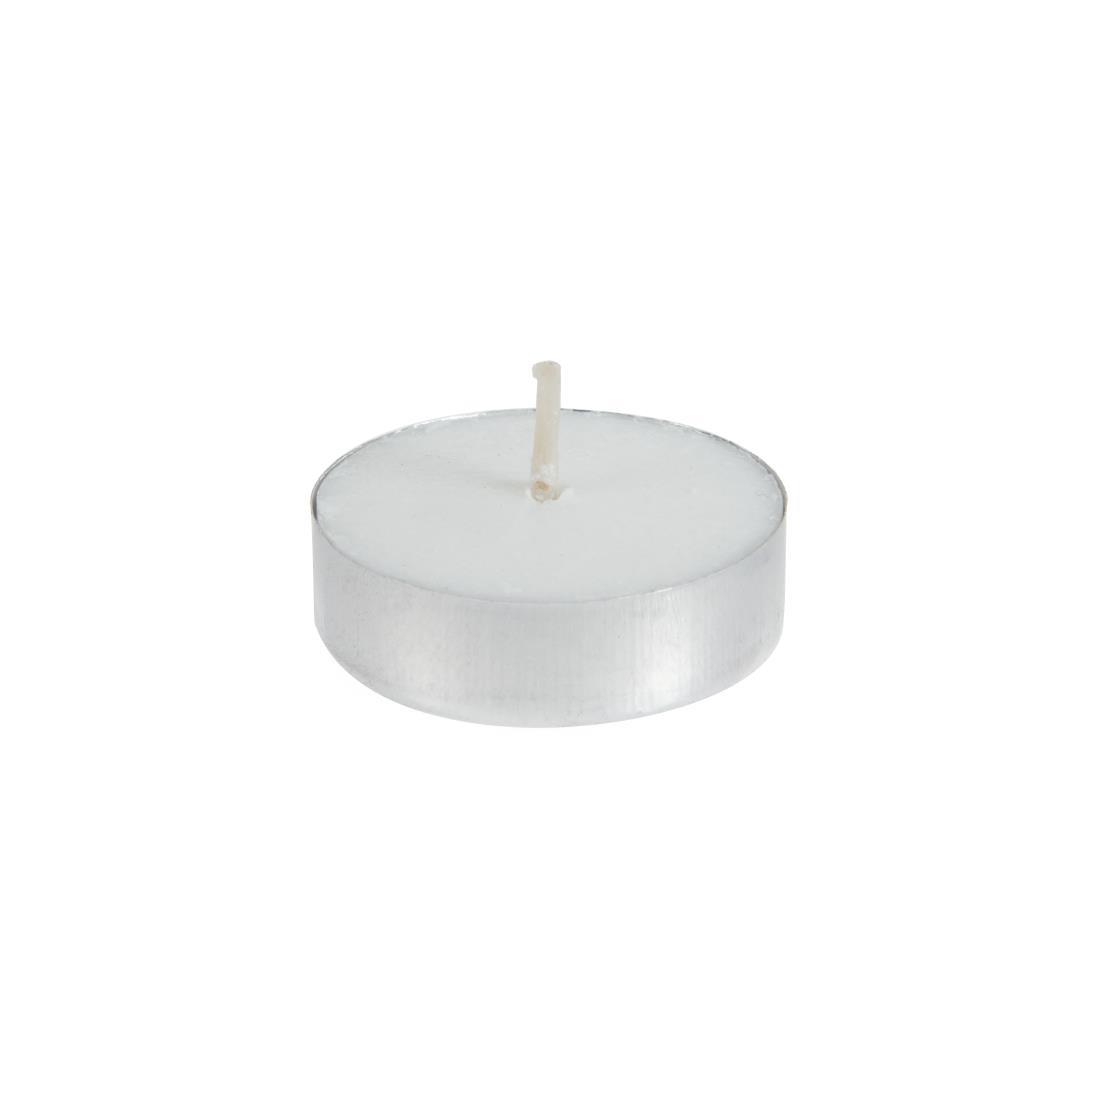 Olympia 4 Hour Tealights (Pack of 100) - GF448  - 6